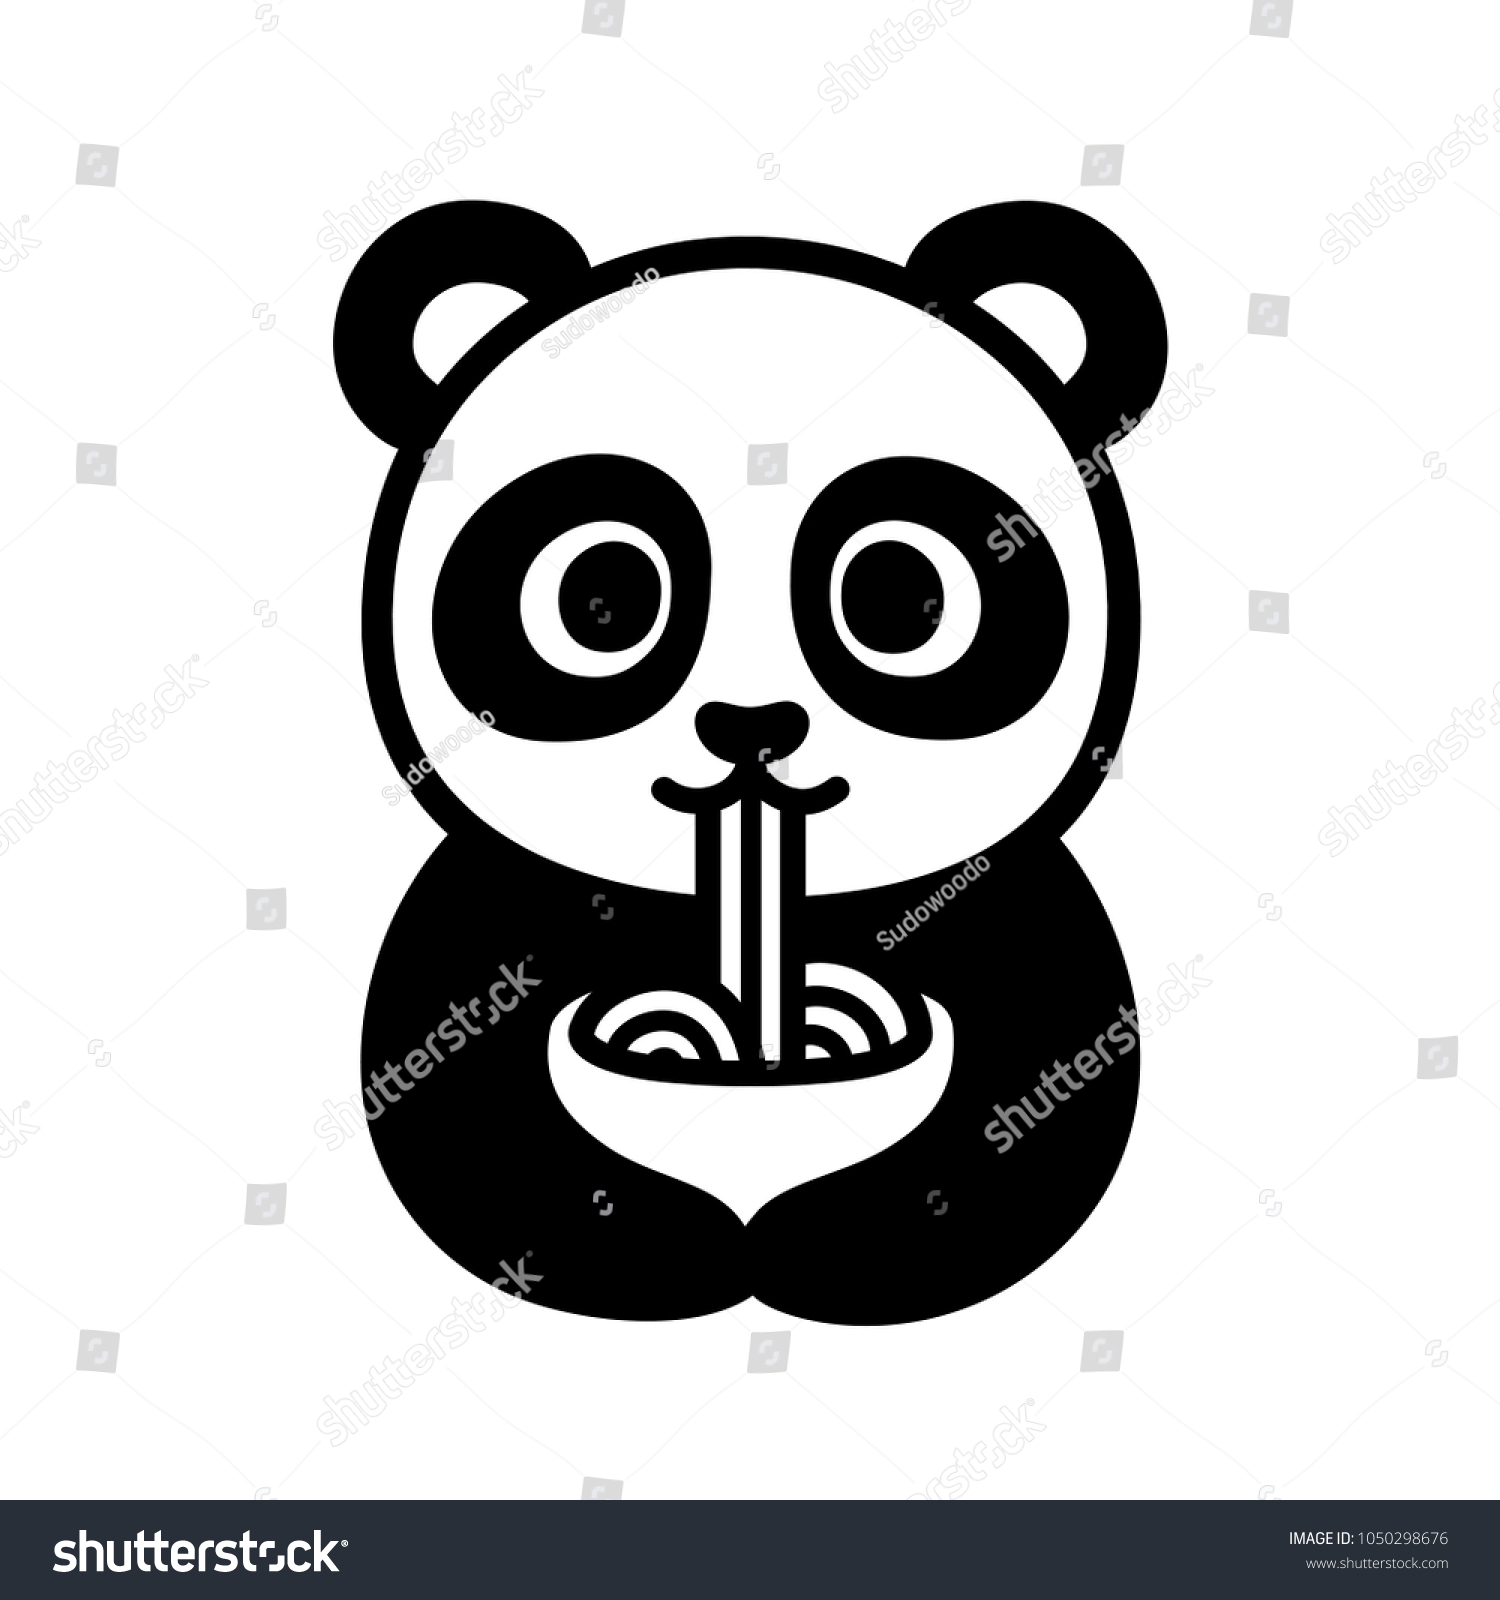 SVG of Cute cartoon panda character eating noodles from bowl. Funny Chinese food illustration. Isolated black and white clip art drawing. svg